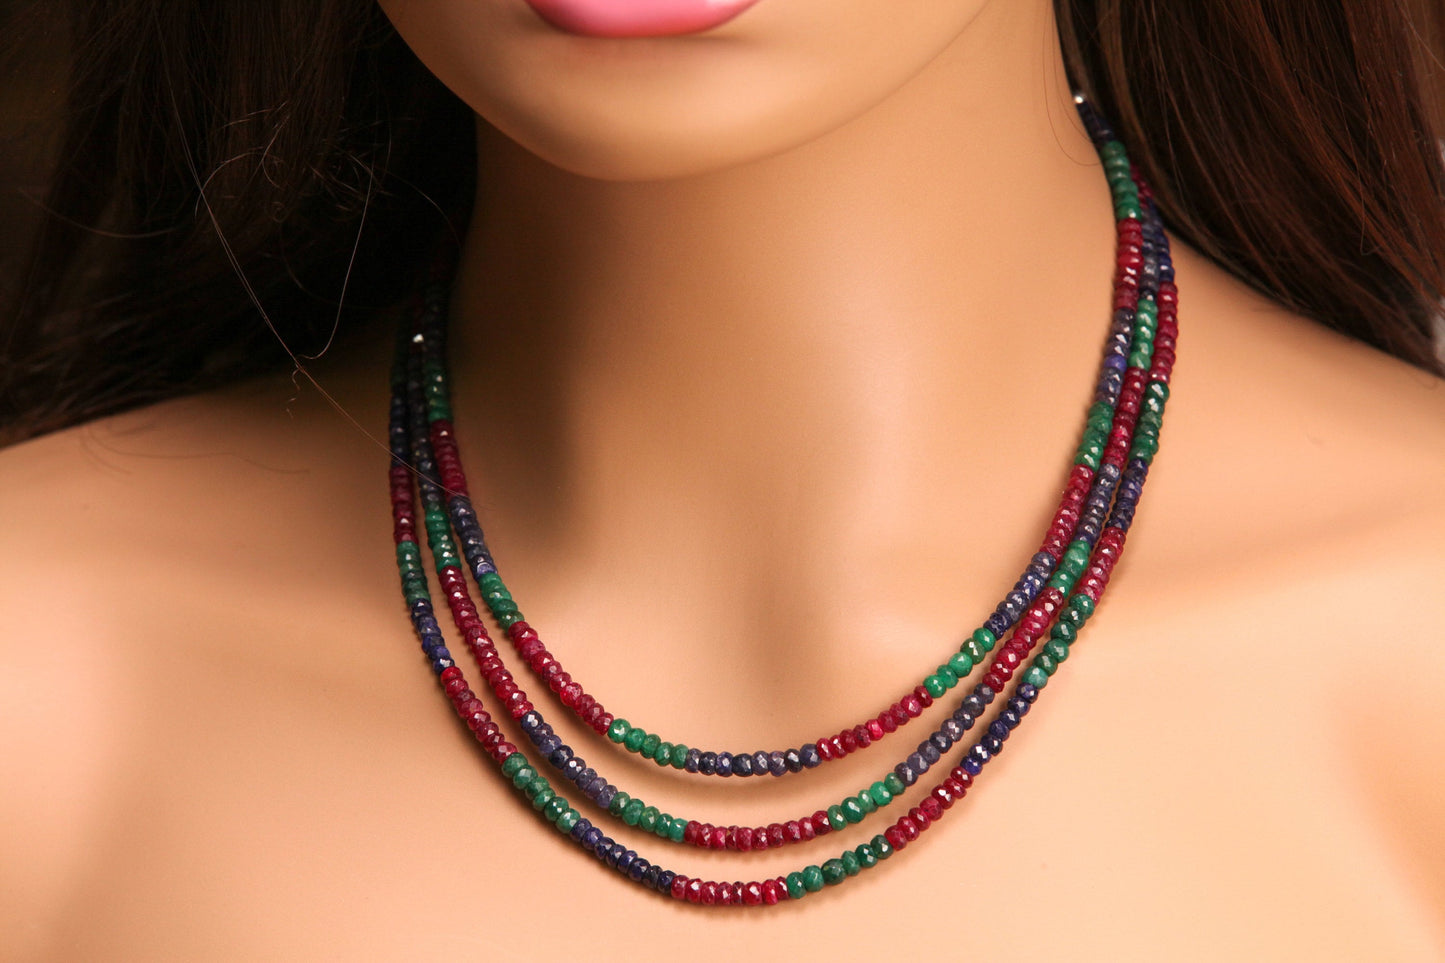 Ruby Sapphire Emerald 3 Line Necklace 4.5-5mm 17" Necklace with 3" Rhodium Lobster Extender Clasp Extender 315cts